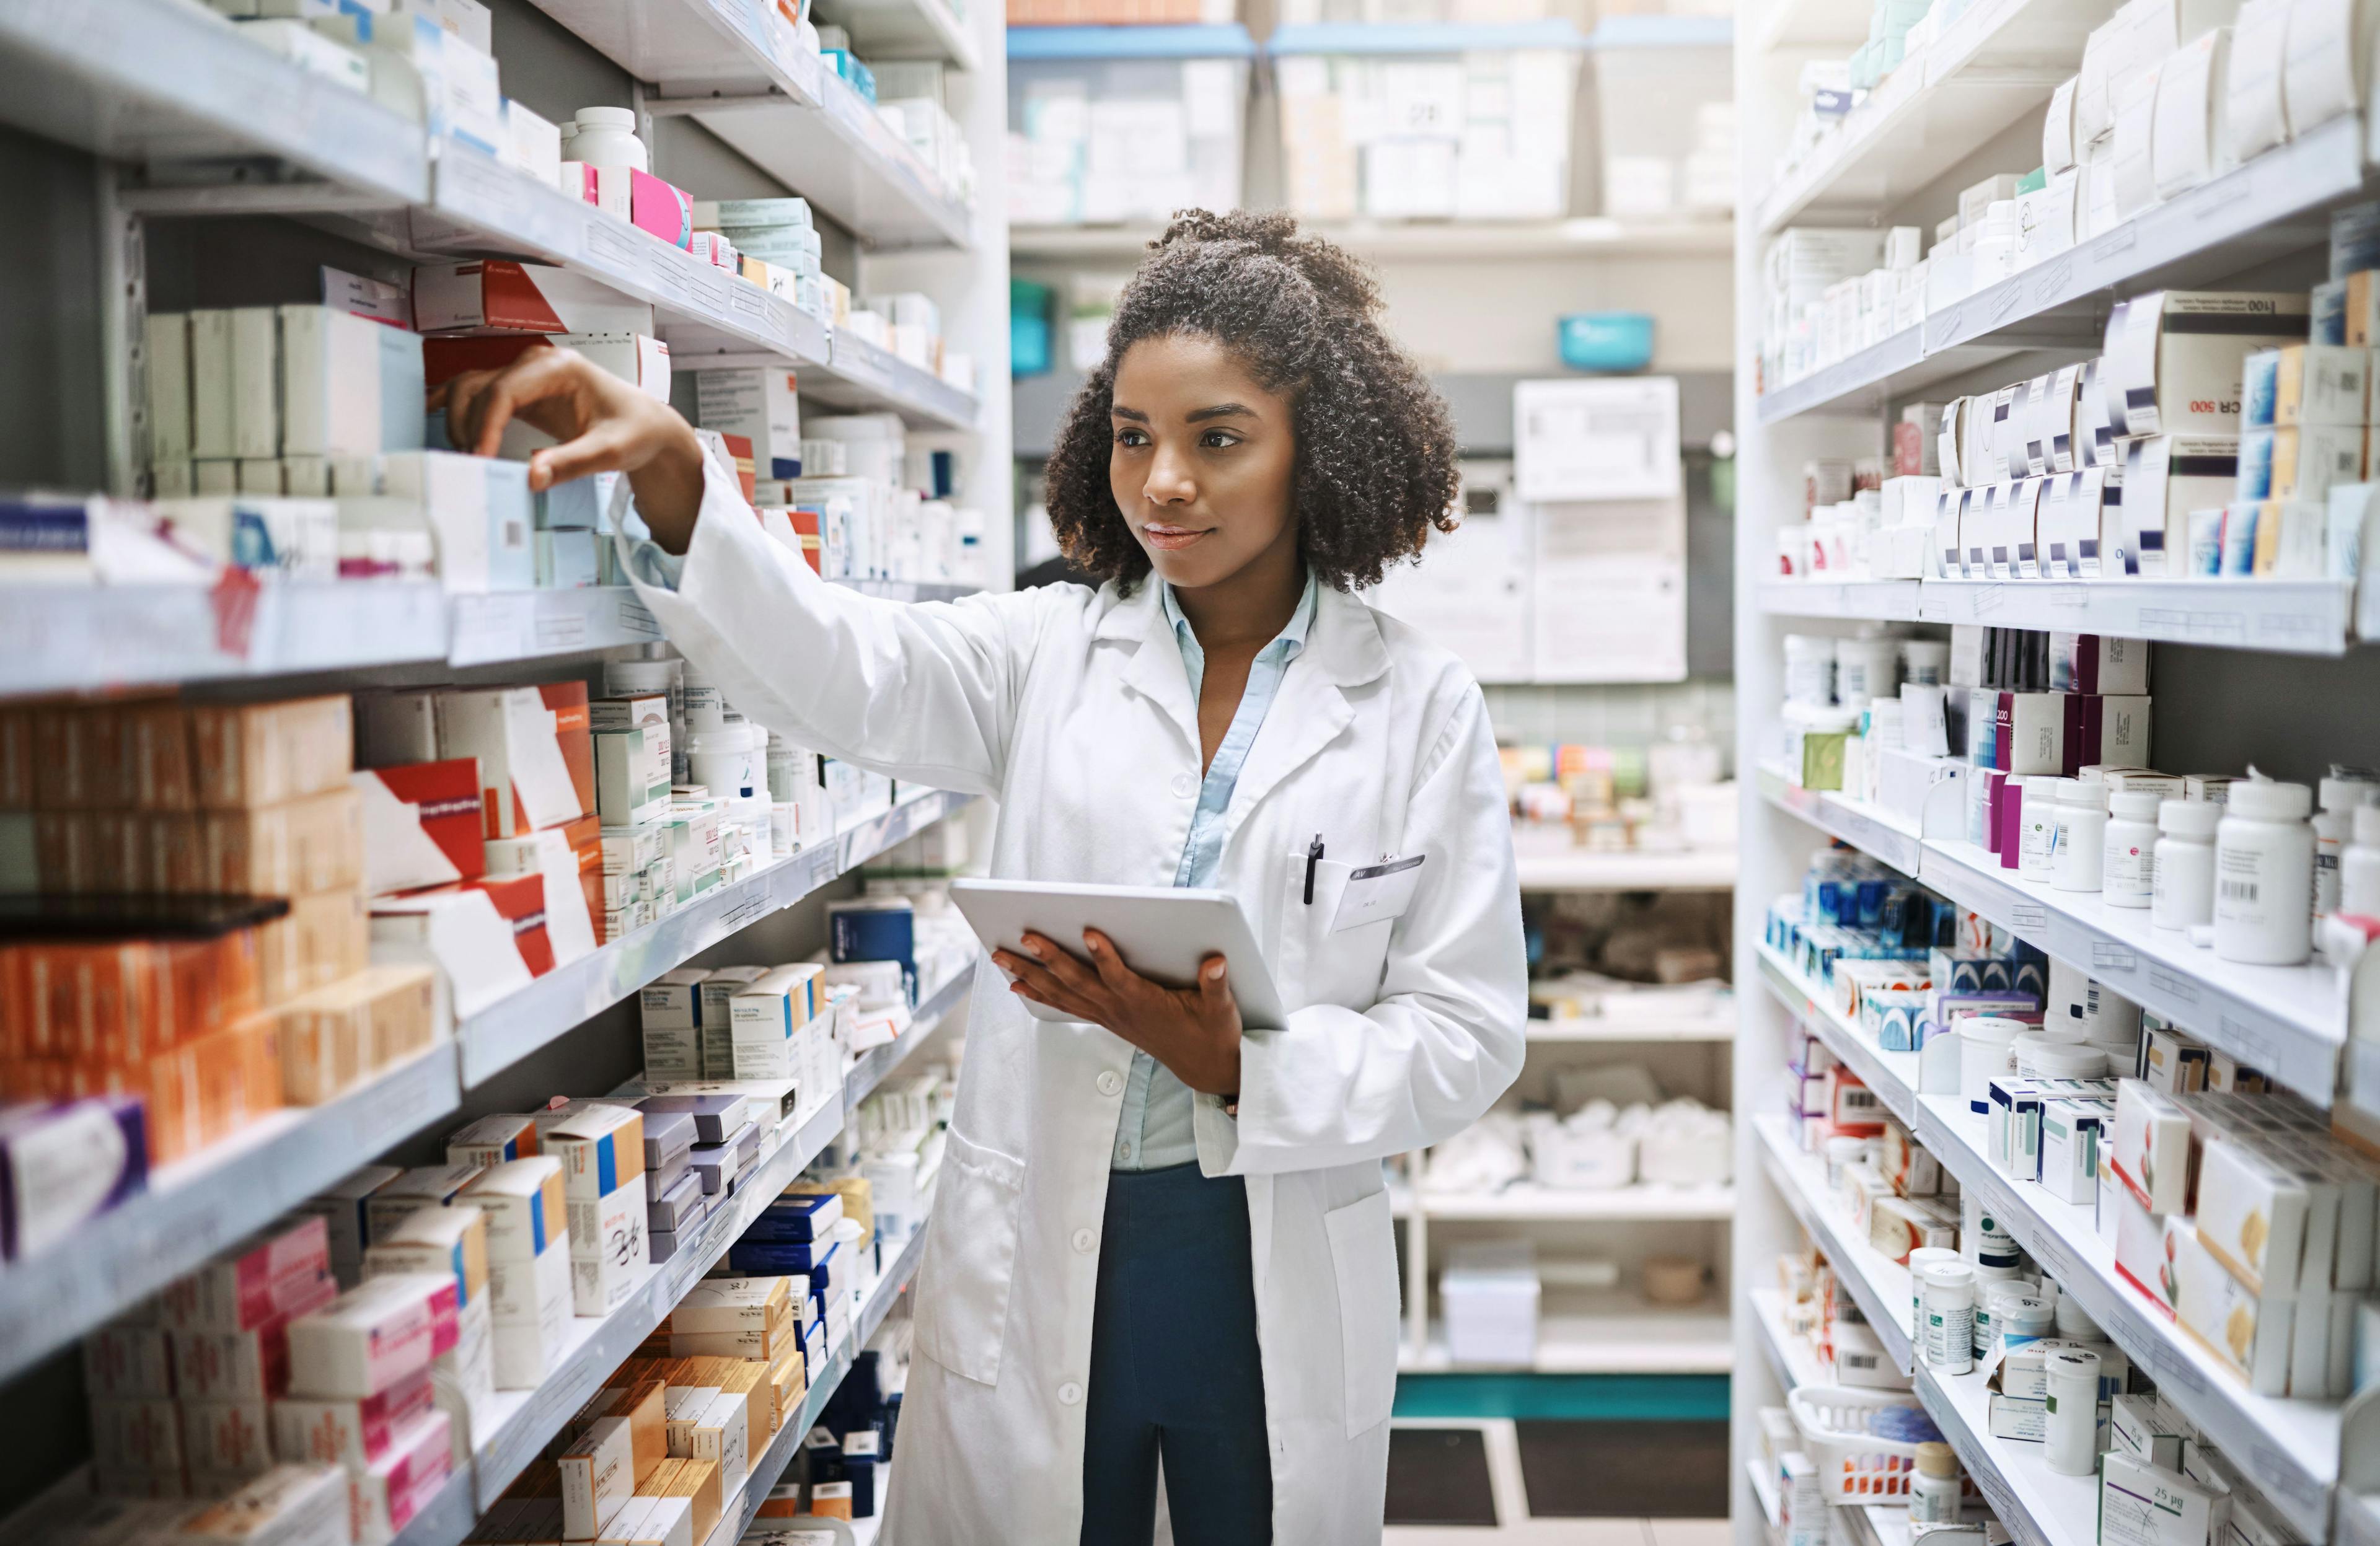 young female pharmacist working in a pharmacy. | Image Credit: Arnéll Koegelenberg/peopleimages.com - stock.adobe.com